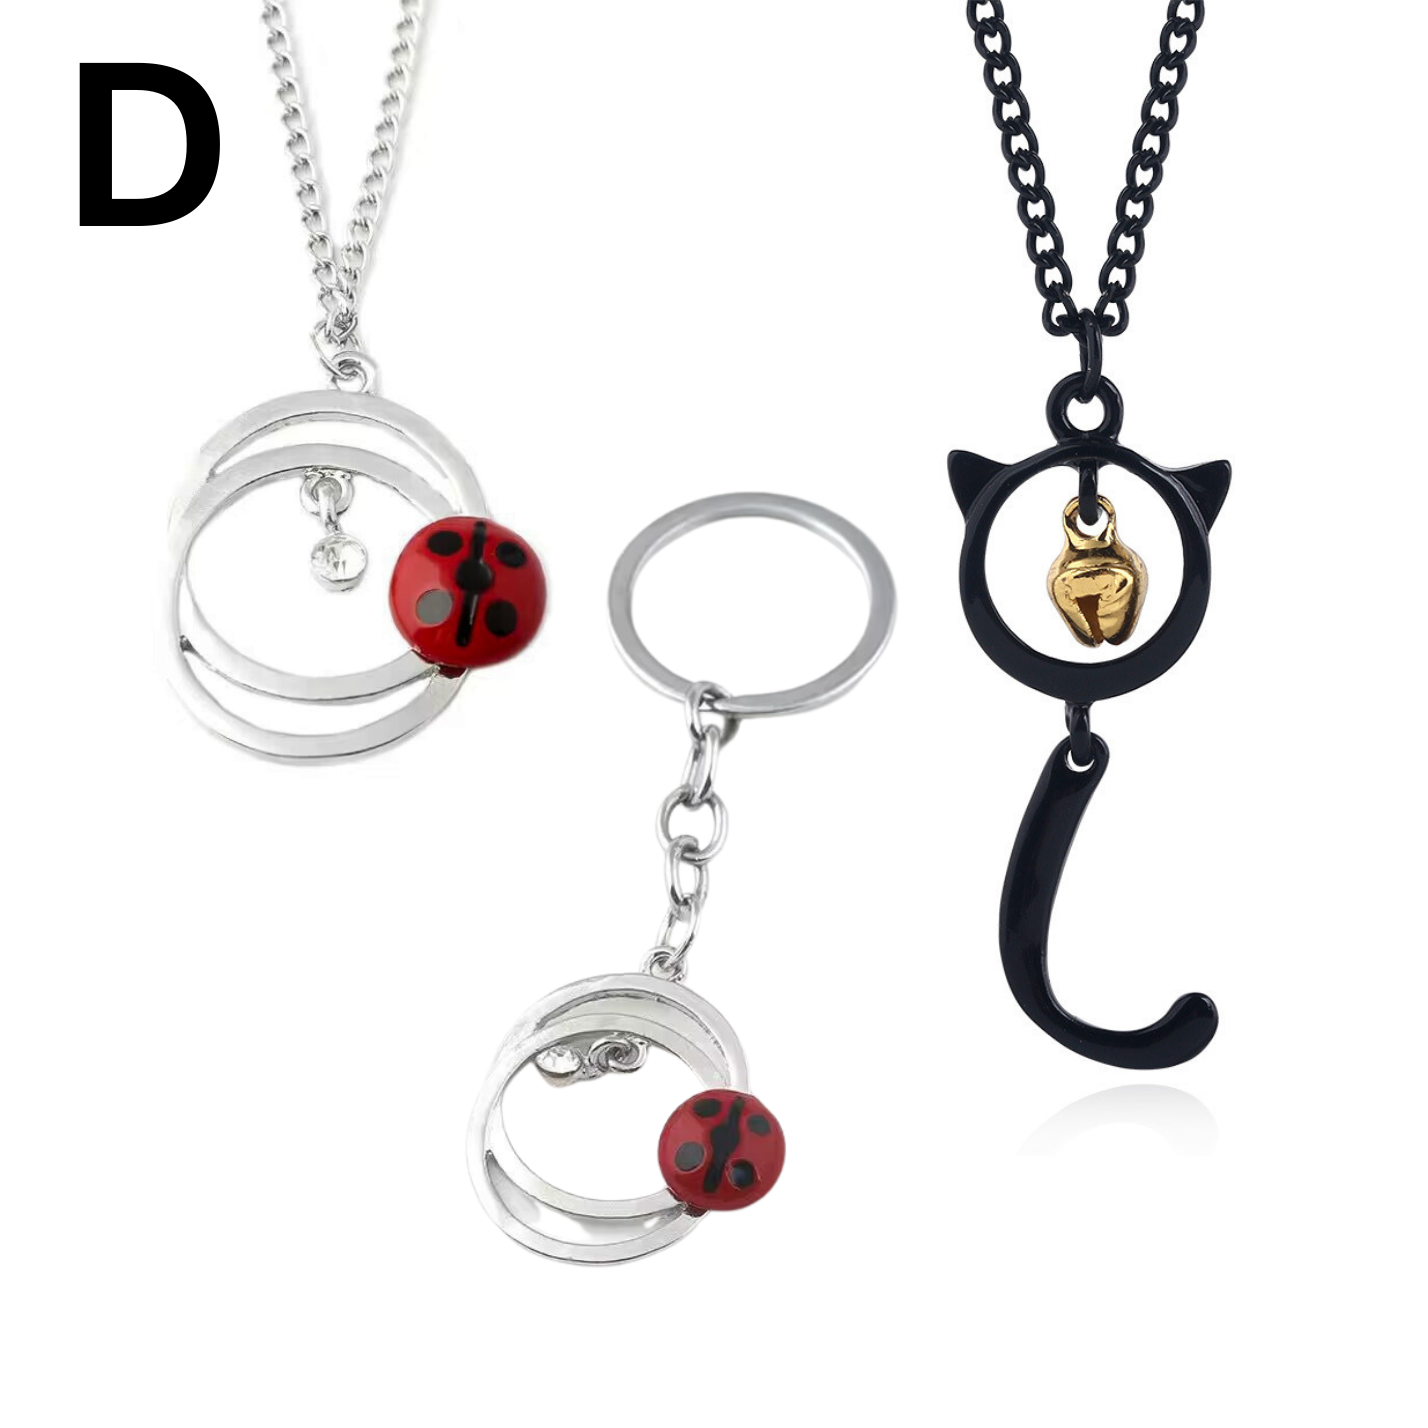 Miraculous Necklaces & Keychain Package | Gift for Friends, Ladybug Fans on Birthday or Anniversary | Black Cat and Ladybug Groovy Design